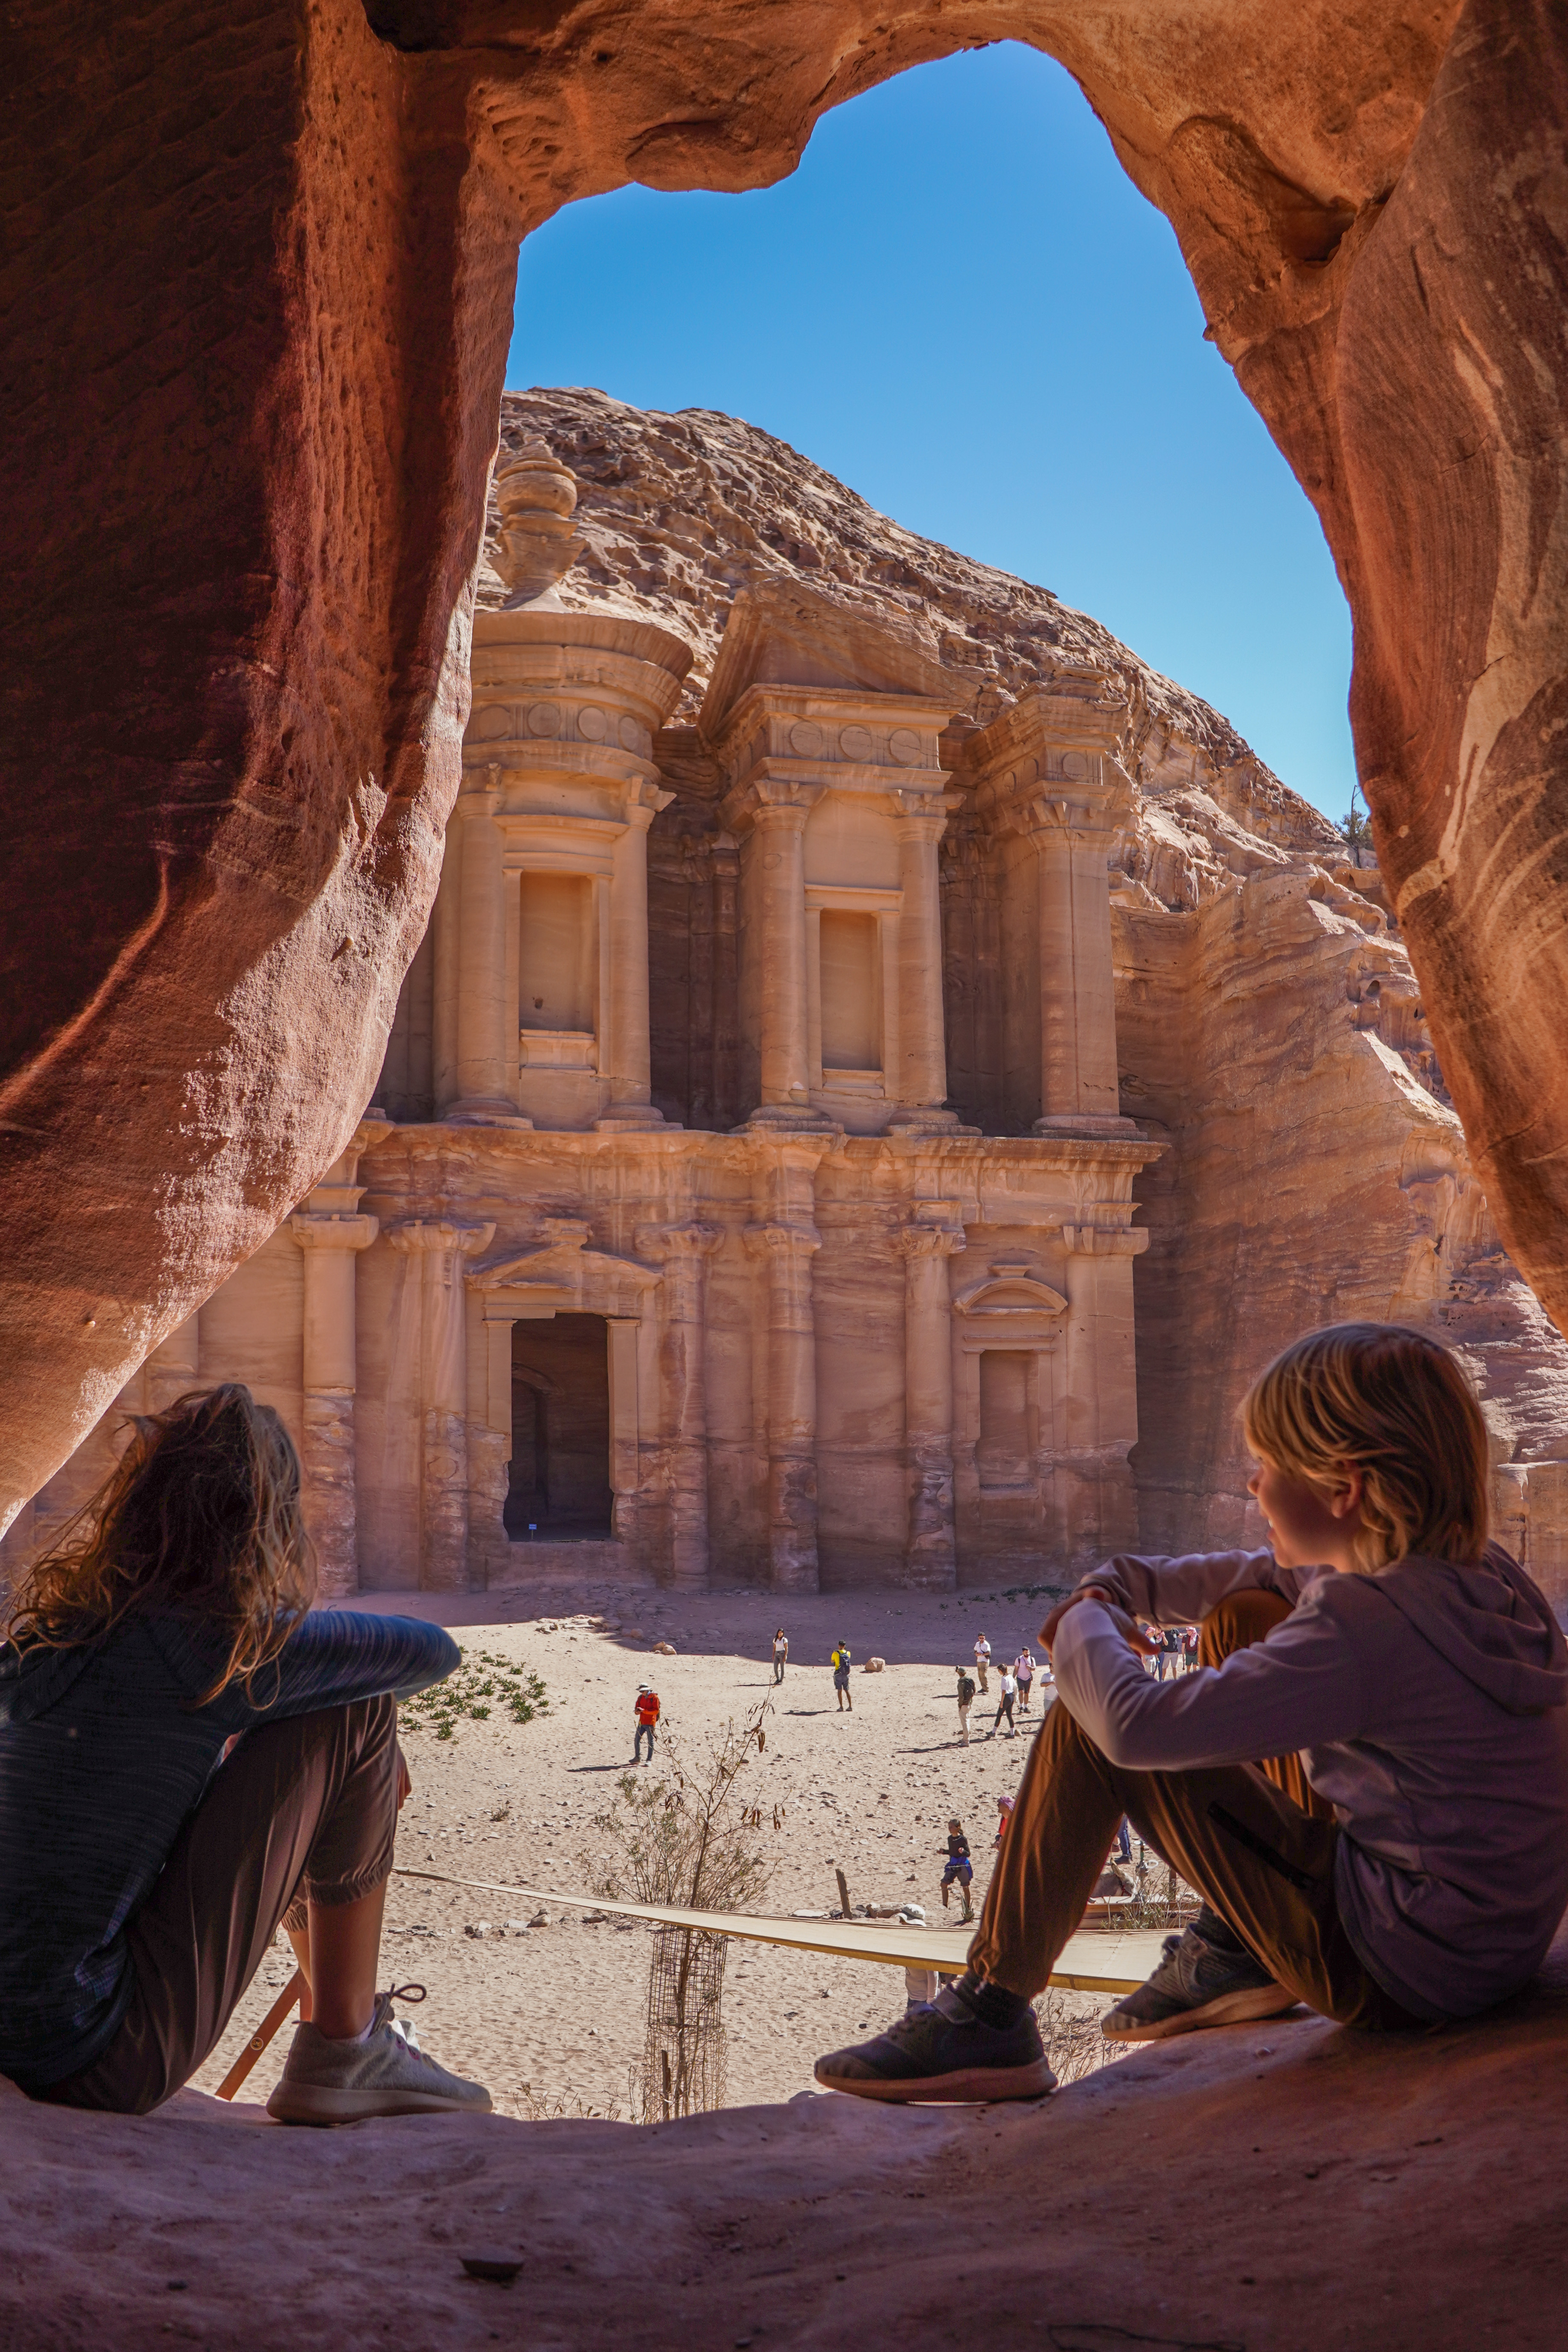 Explore around The Monastery in Petra as there are many spots that provide unique incredible views.